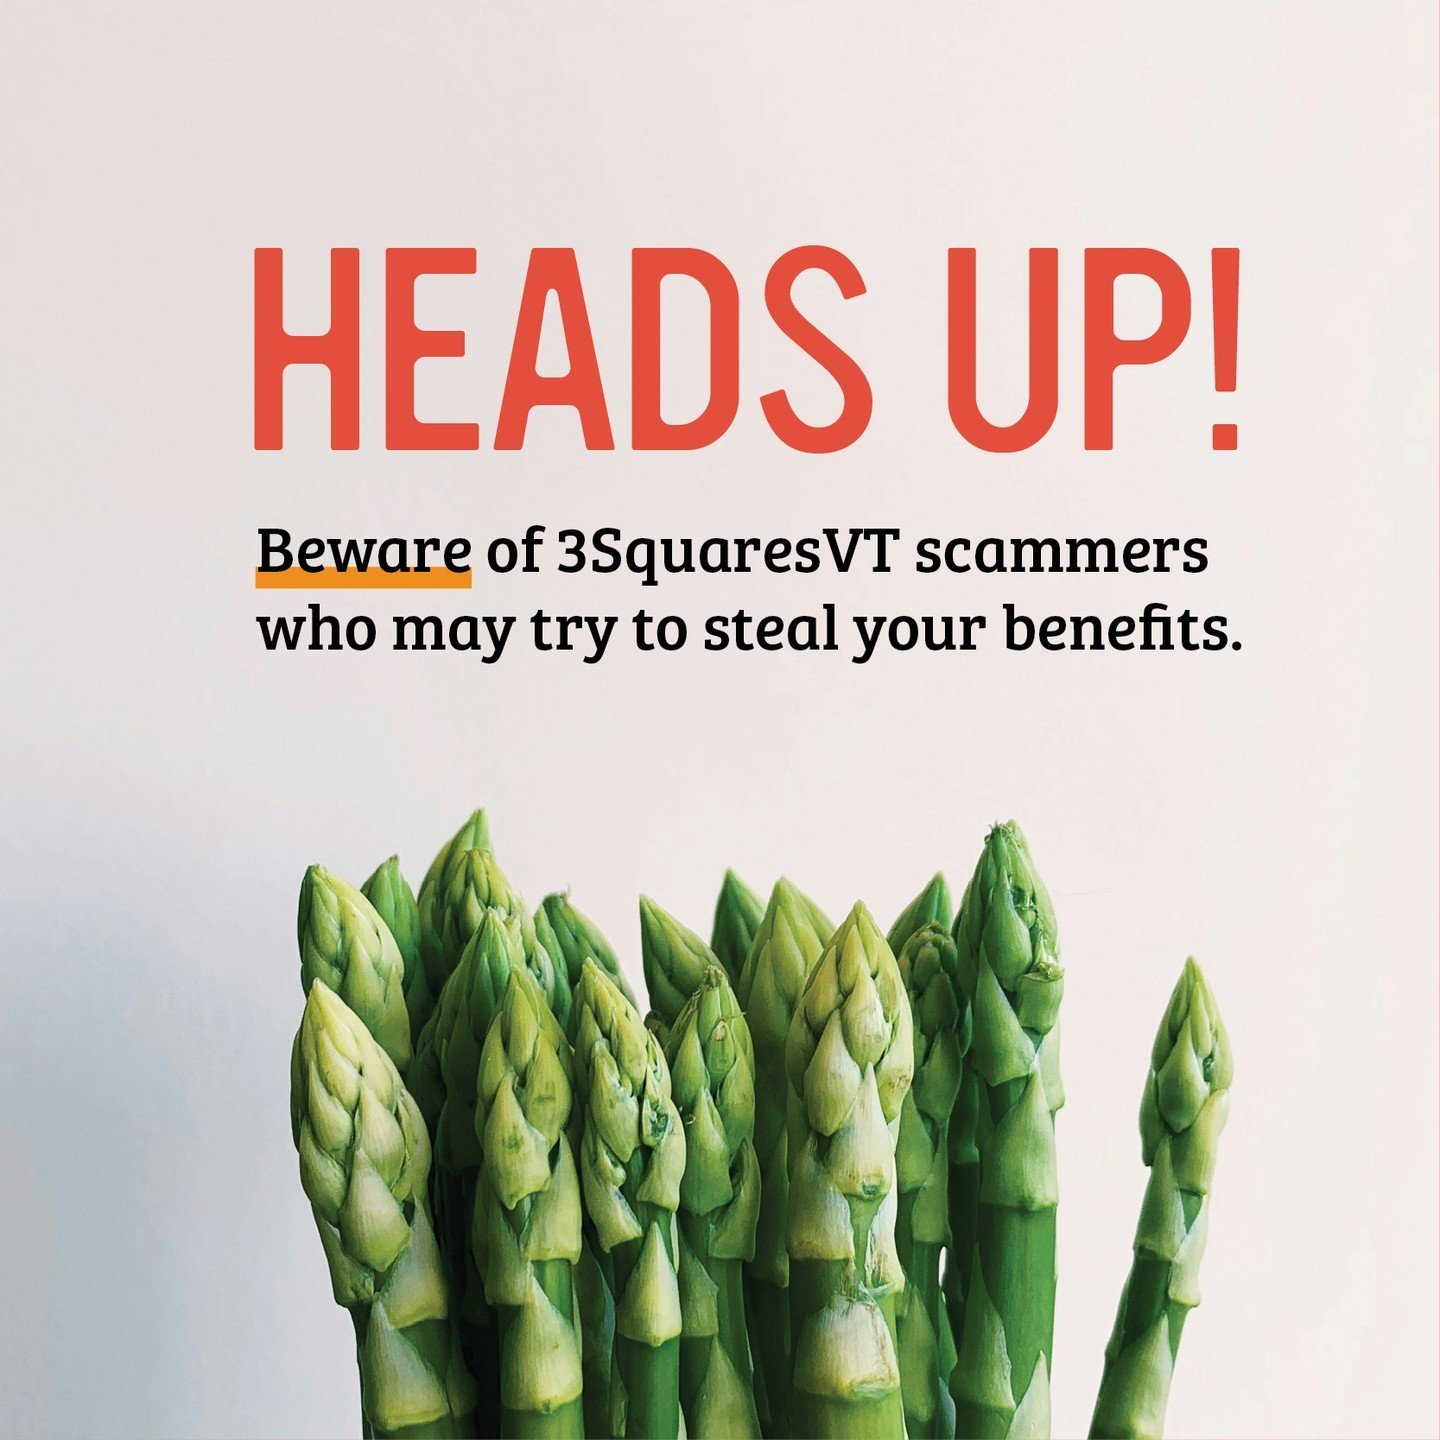 Heads up! Beware of 3SquaresVT scammers who may try to steal your benefits. 

NEVER share your EBT card number or personal info. If you receive any suspicious emails or calls asking for this info, it's a scam! 

If you suspect you are a victim of a s